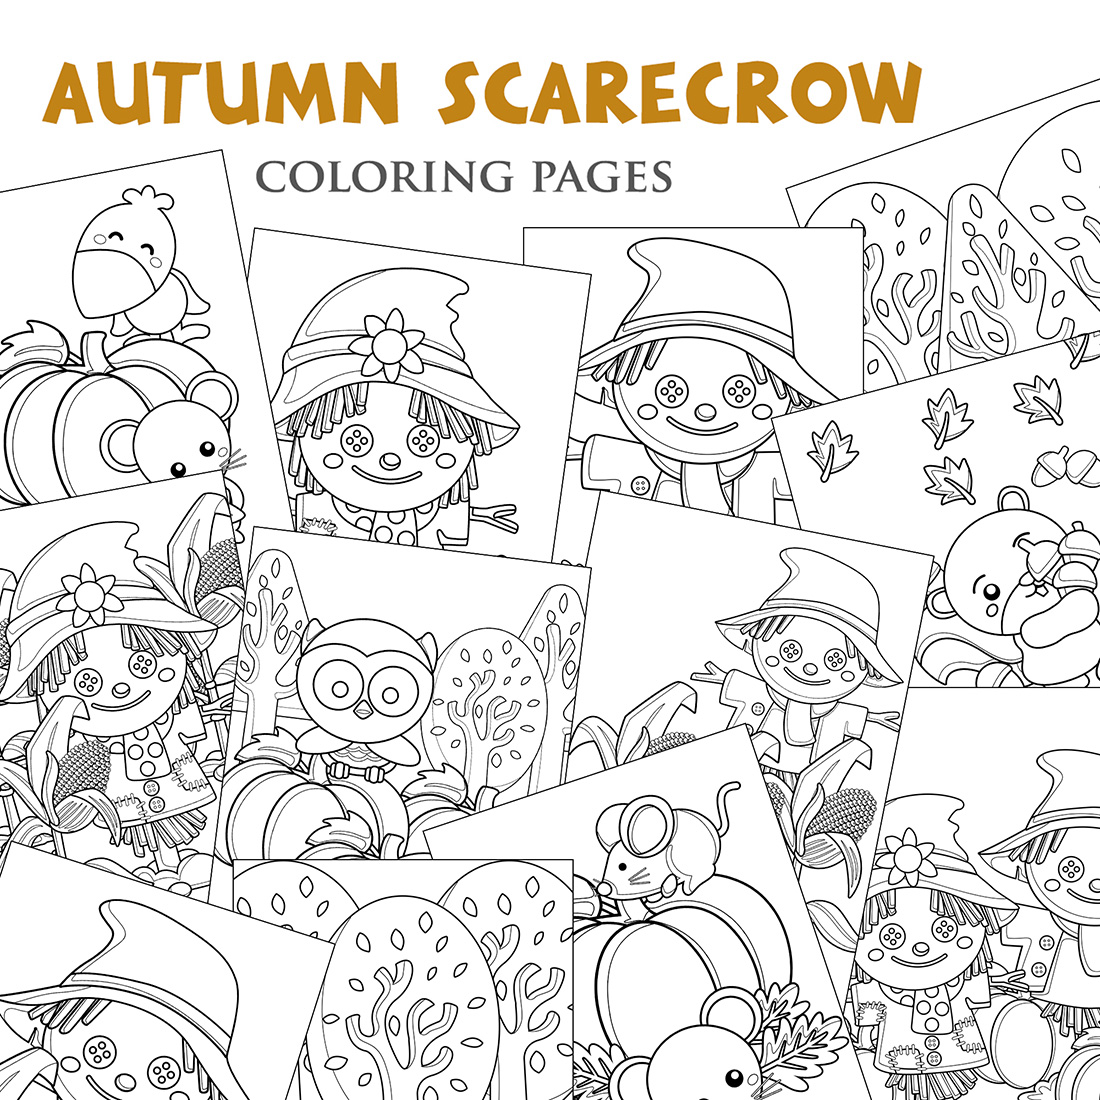 Funny Cartoon Autumn Fall Farm Scarecrow with Animals Bird Mouse Owl Raven Beaver Nature Tree Forest Coloring Pages for Kids and Adult cover image.